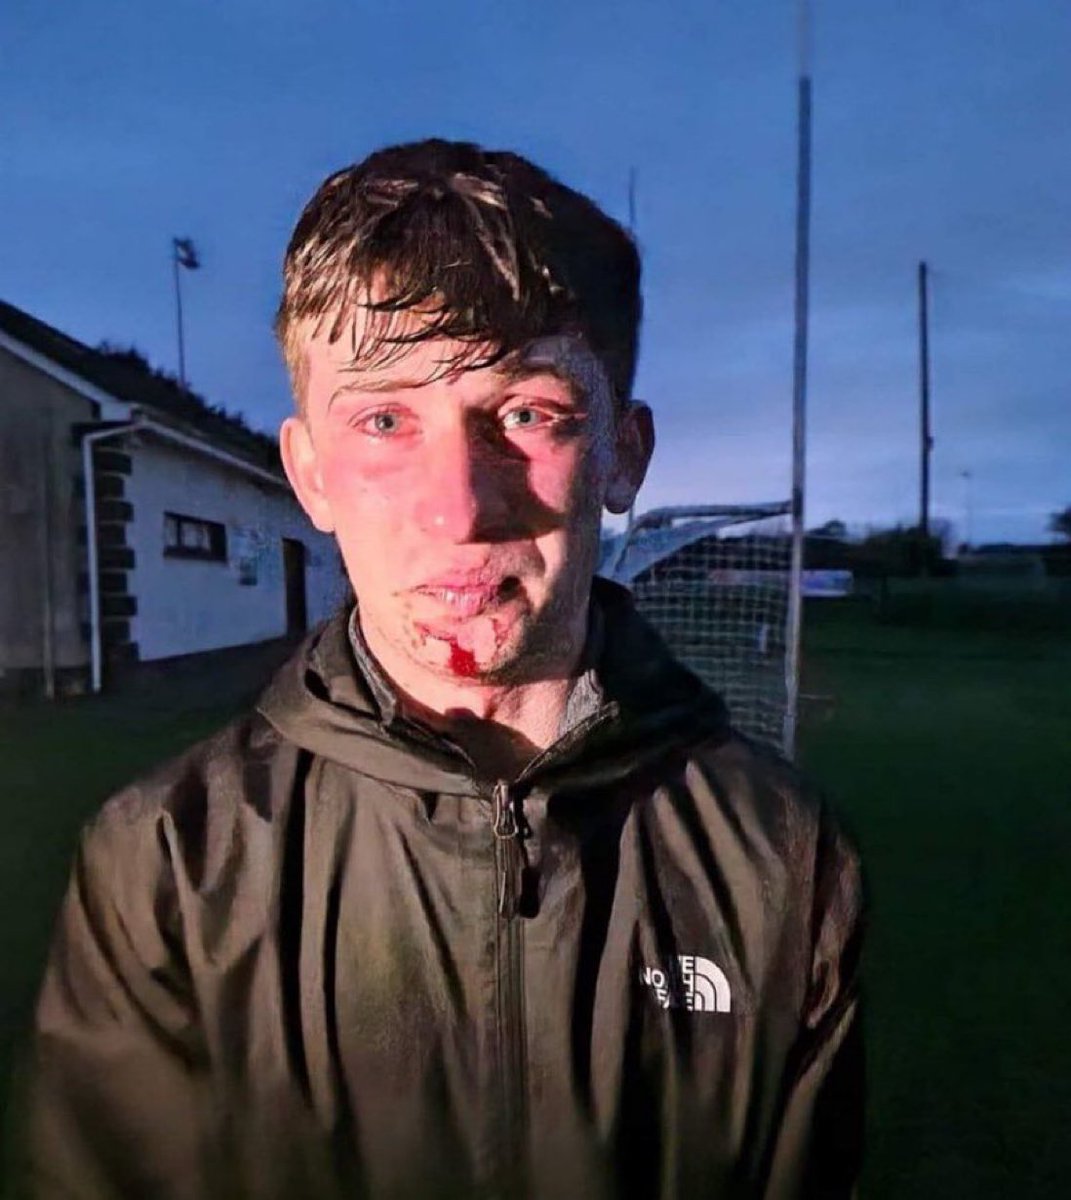 This Irish teenager was pepper sprayed multiple times giving him visible swollen eyes; he was beaten and hit on the face several times with police baton. Reports say his teeth were cracked and other facial injuries. His crimes were attending a peaceful demonstration against